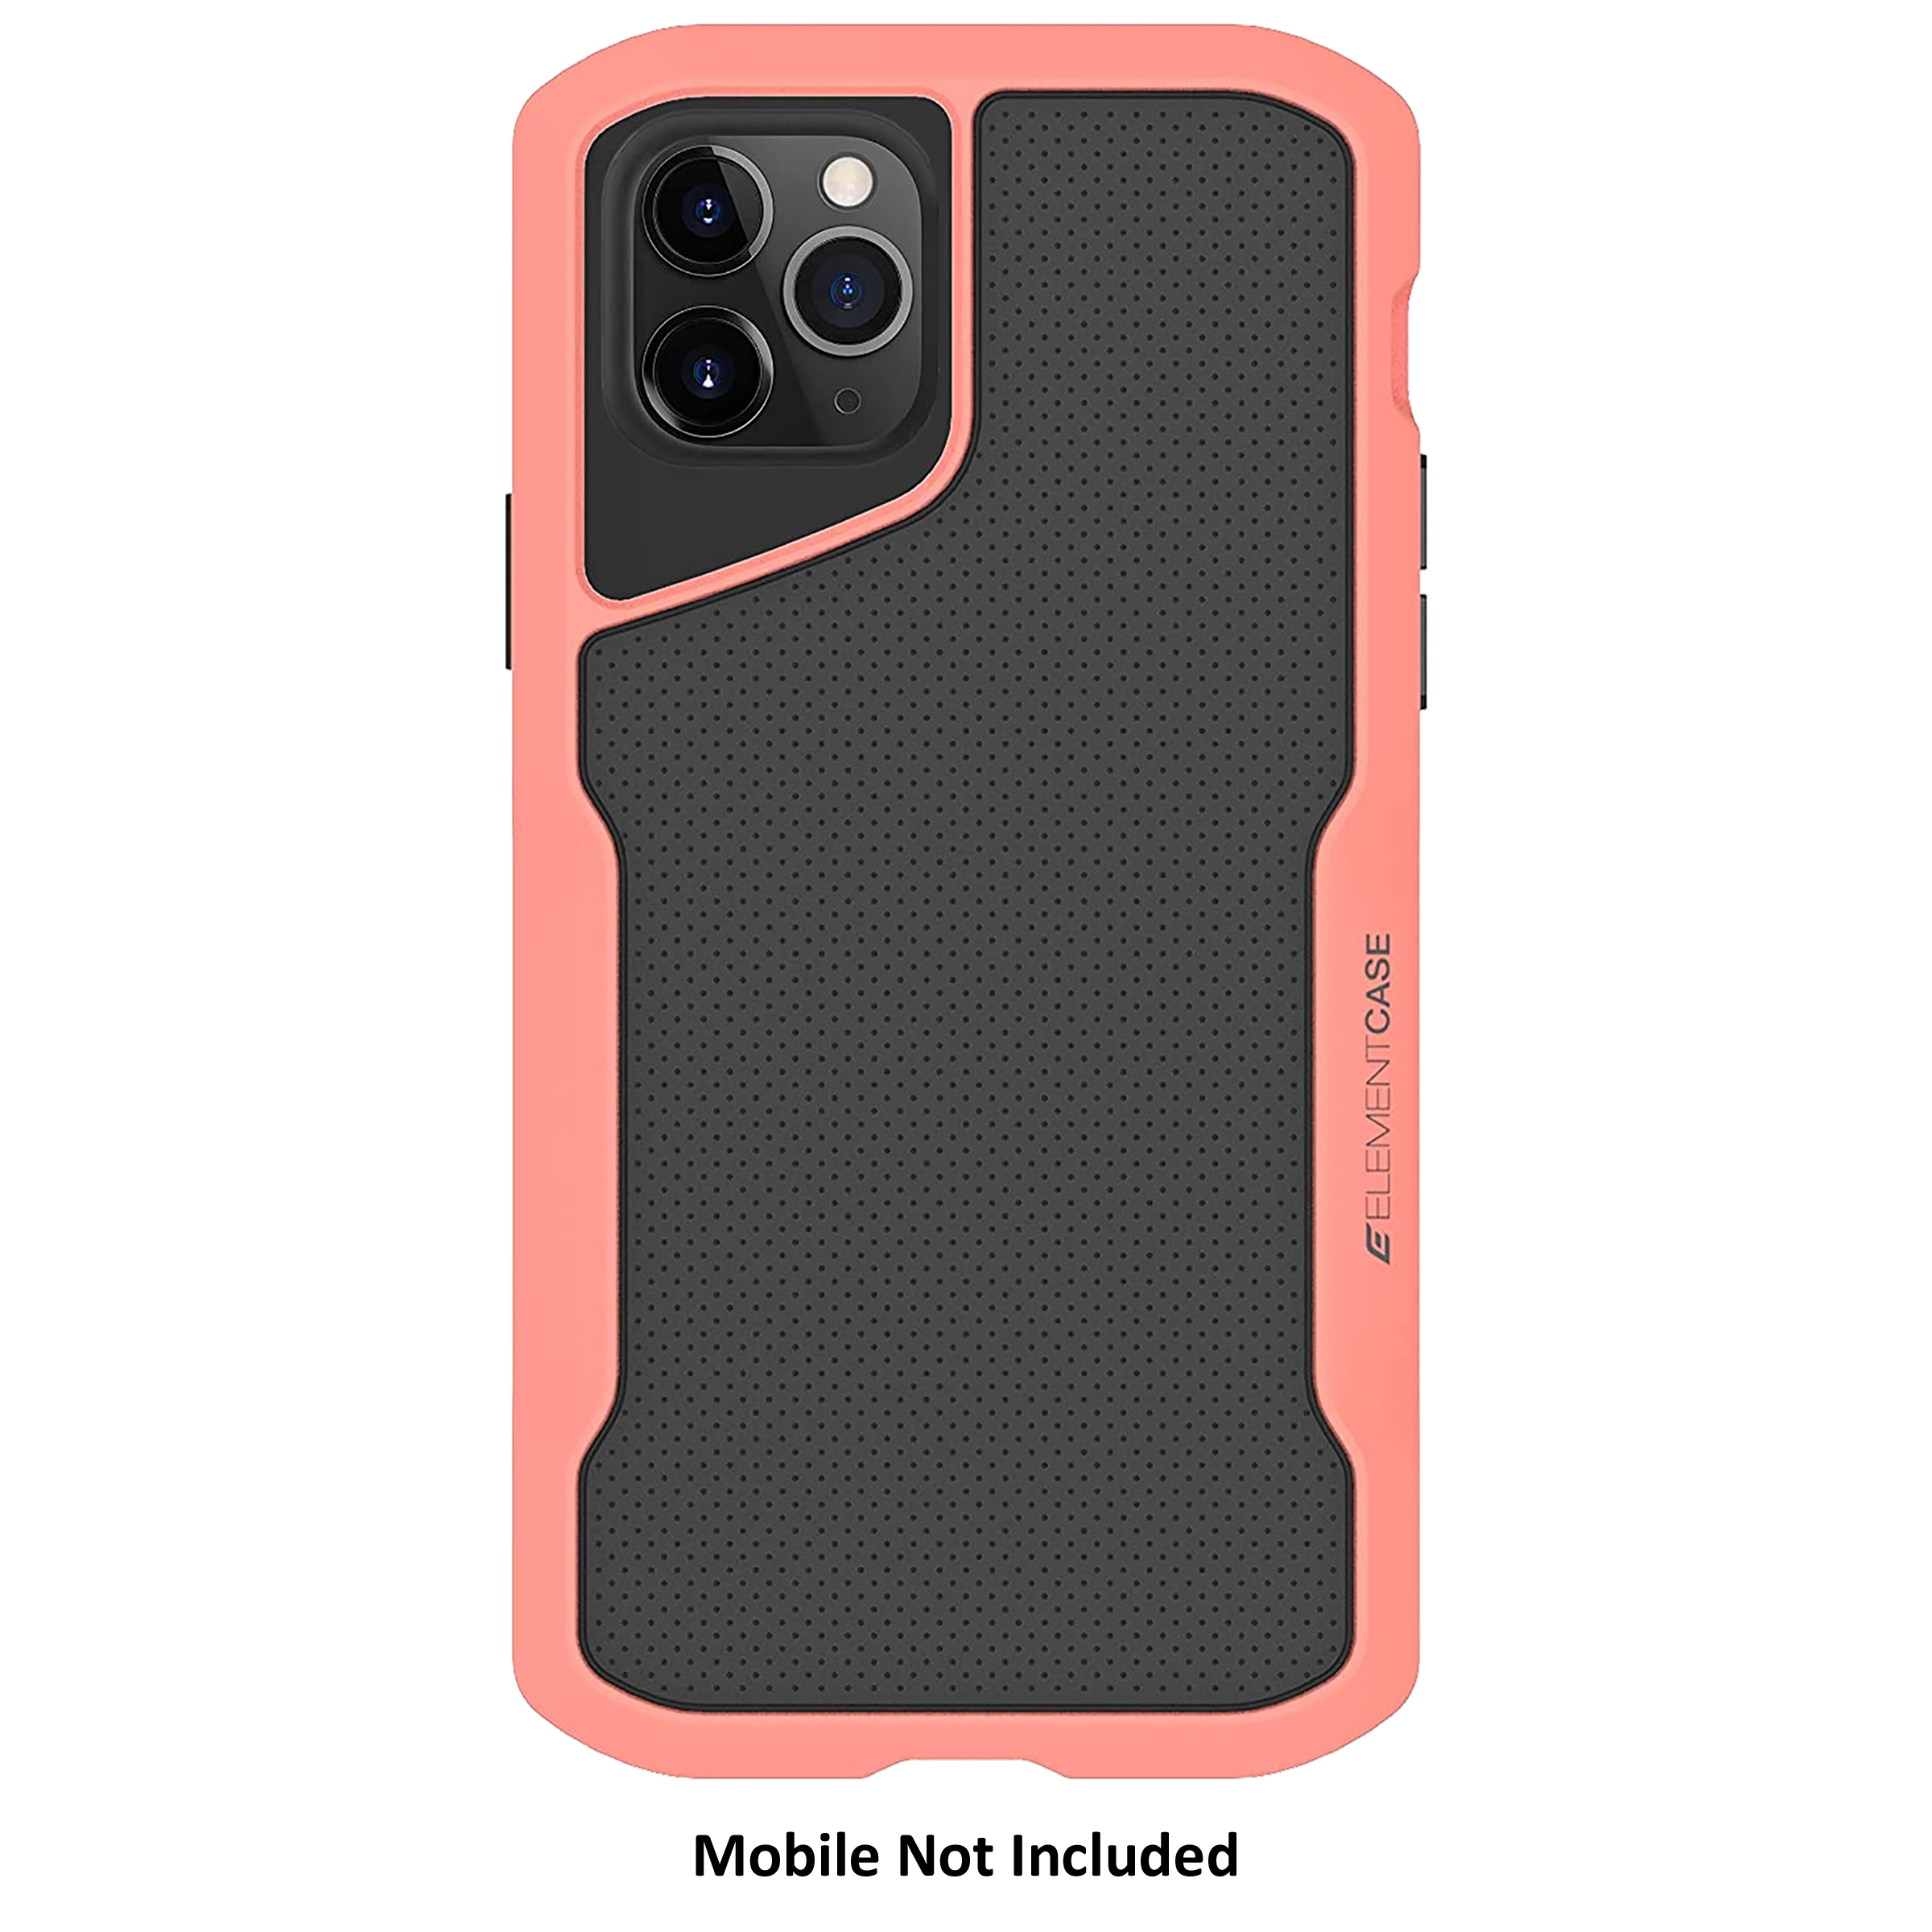 Element Case Shadow Thermoplastic Polyurethane Back Case For iPhone 11 Pro Max (Mil-Spec Drop Protection, EMT-322-192FX-03, Melon)_3